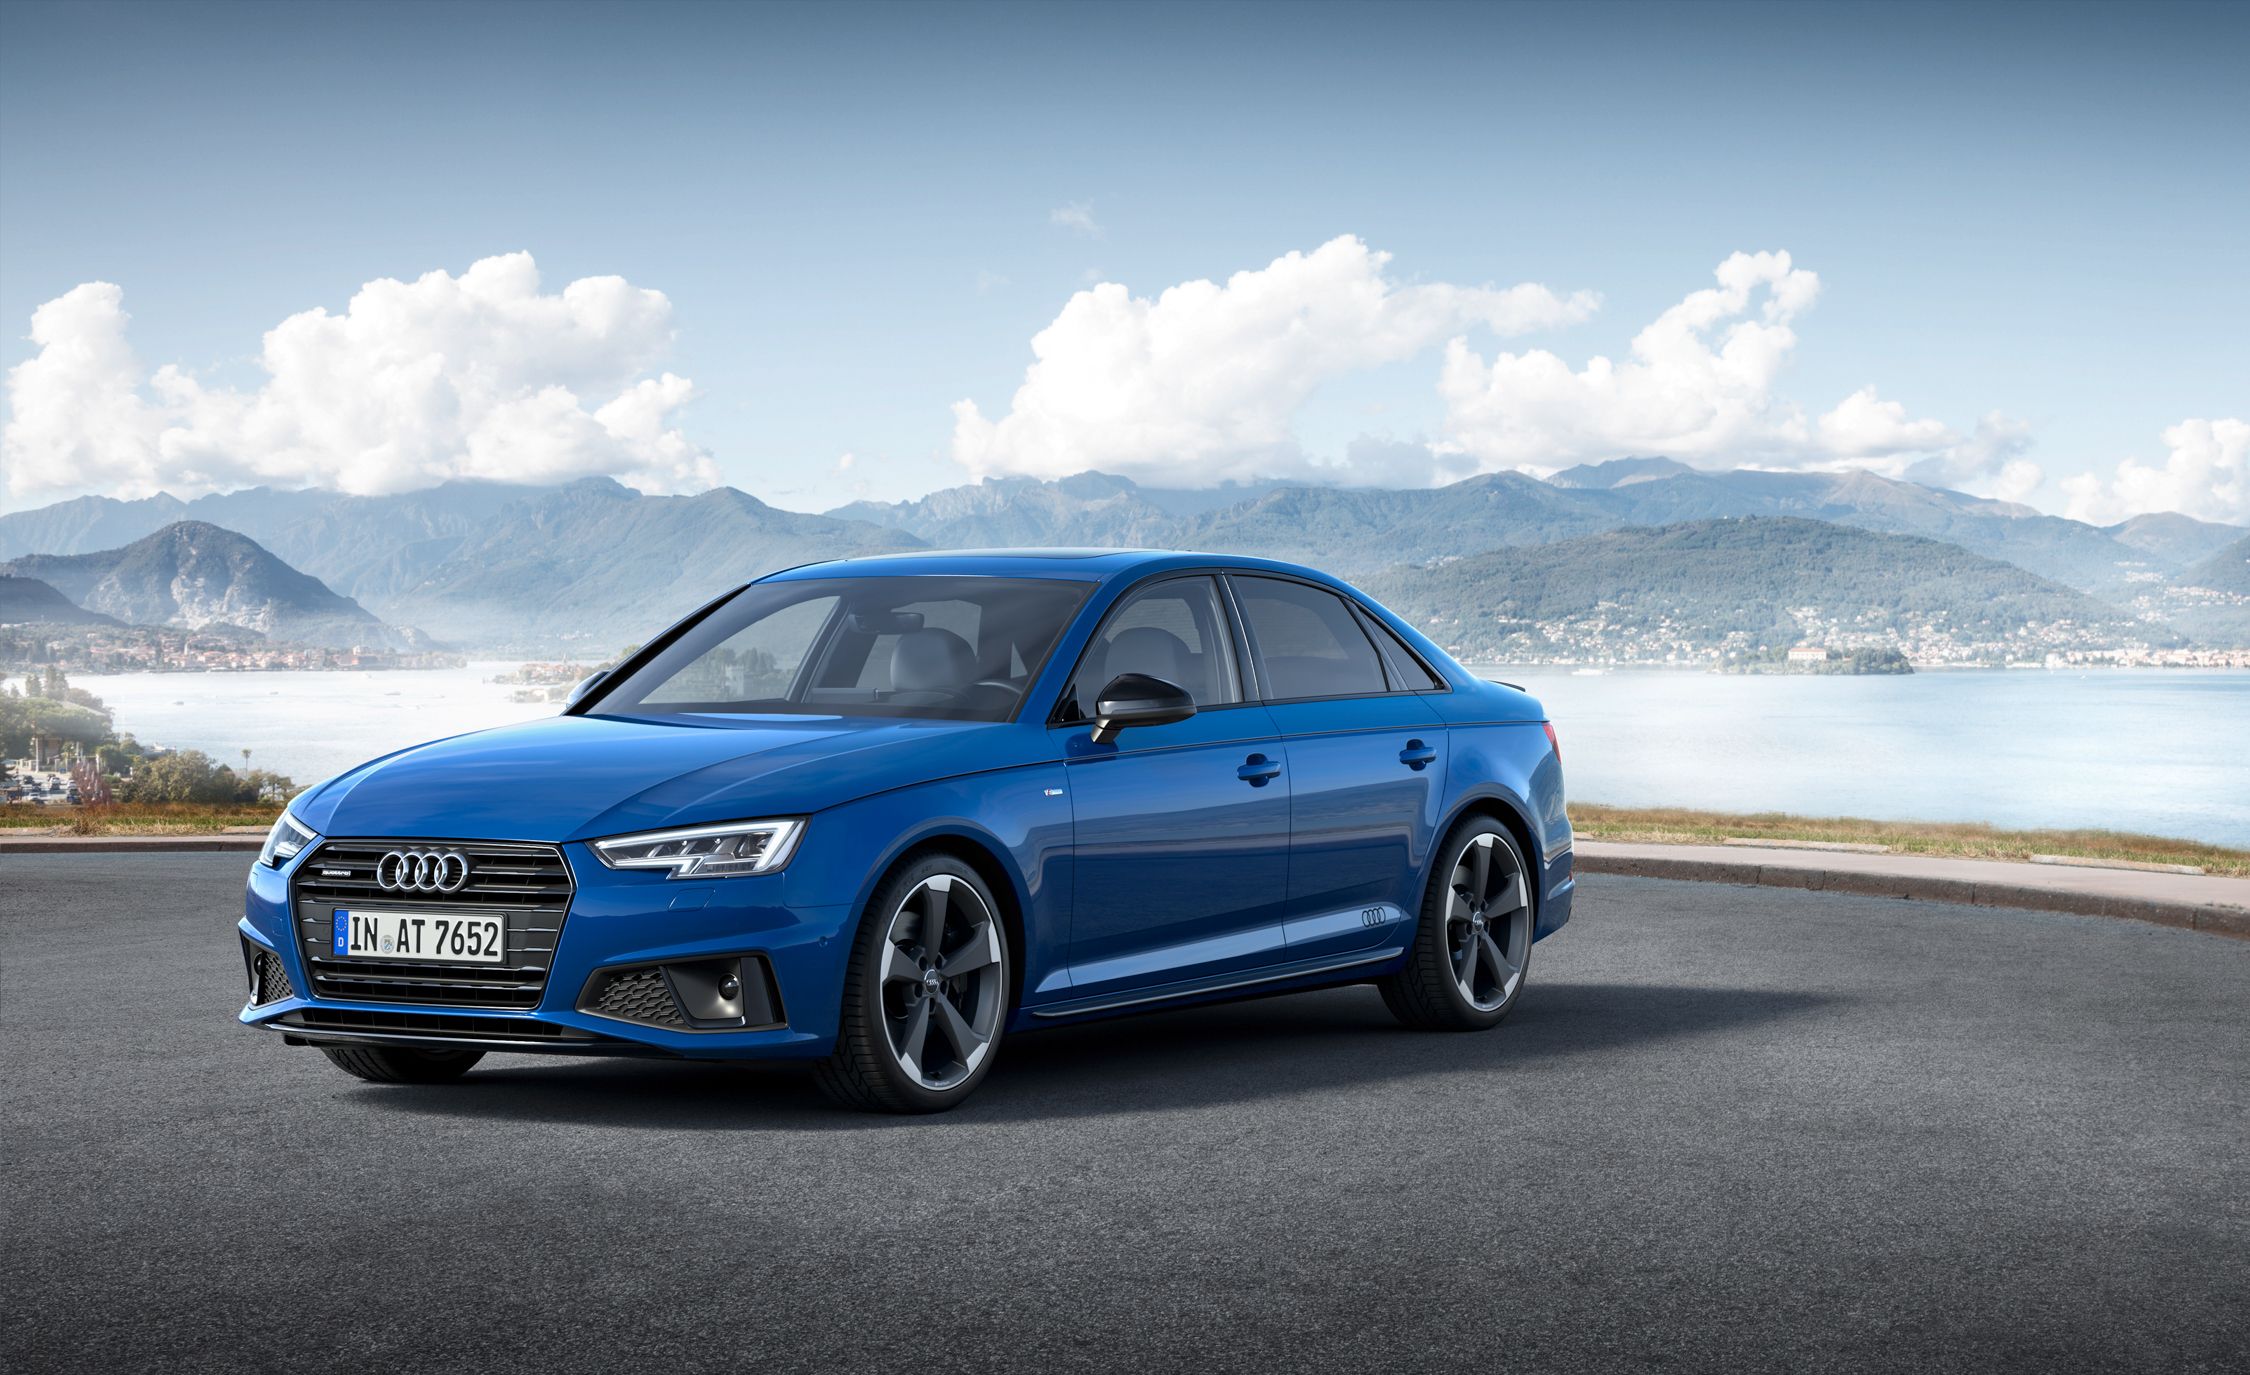 2019 Audi A6 Review, Pricing, and Specs